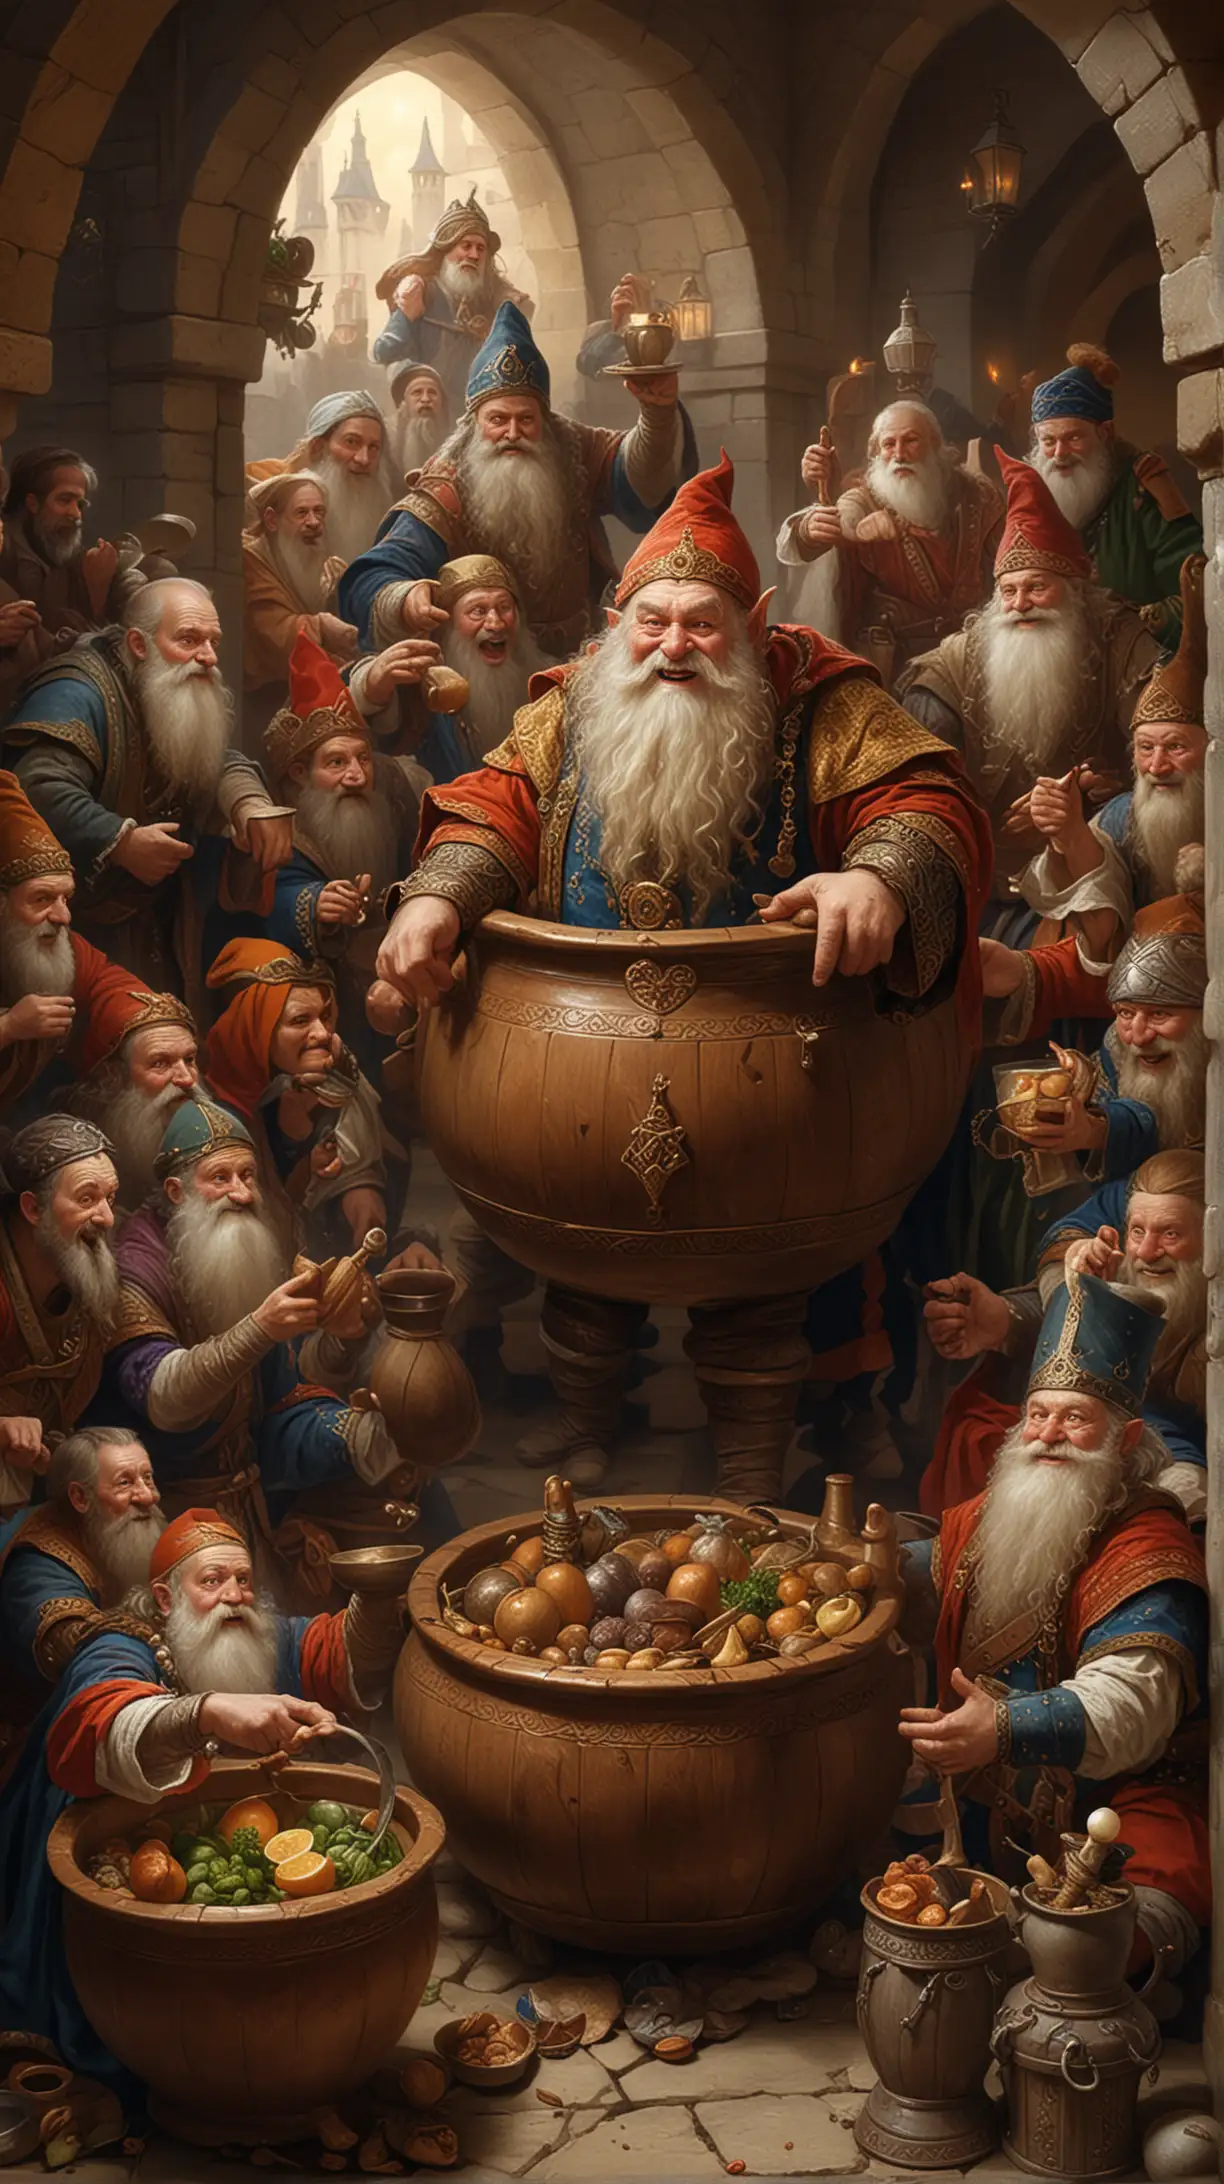 Royal Banquet Scene Dwarf Emerges from Pot Amidst Guests Surprise